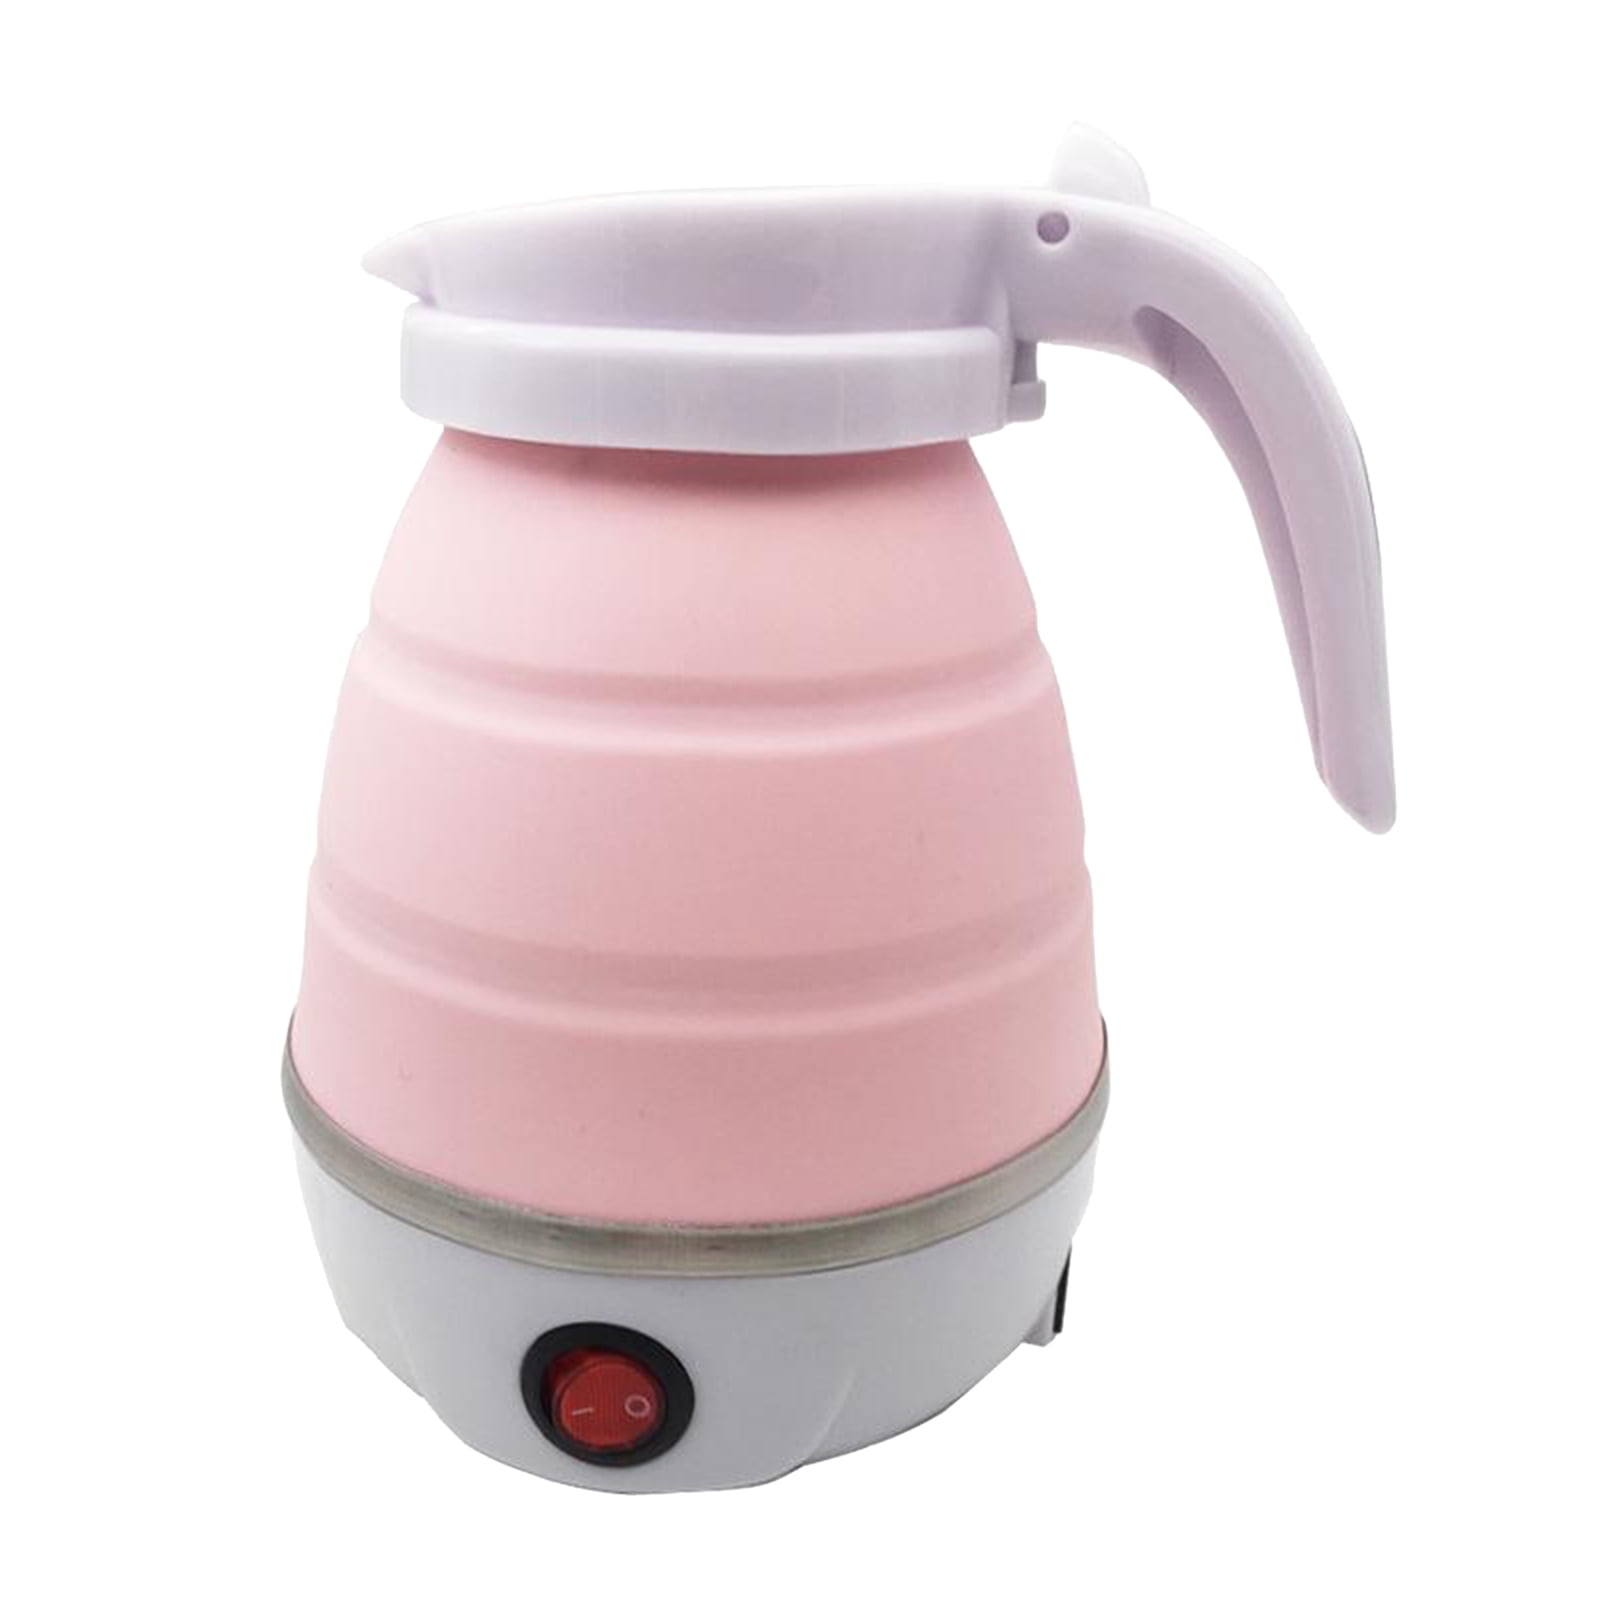 0.8L Small Electric Kettles Stainless Steel, Travel Mini Hot Water Boiler  Heater, Double Wall Cool Touch Portable Teapot Heater, Auto Shut-Off 